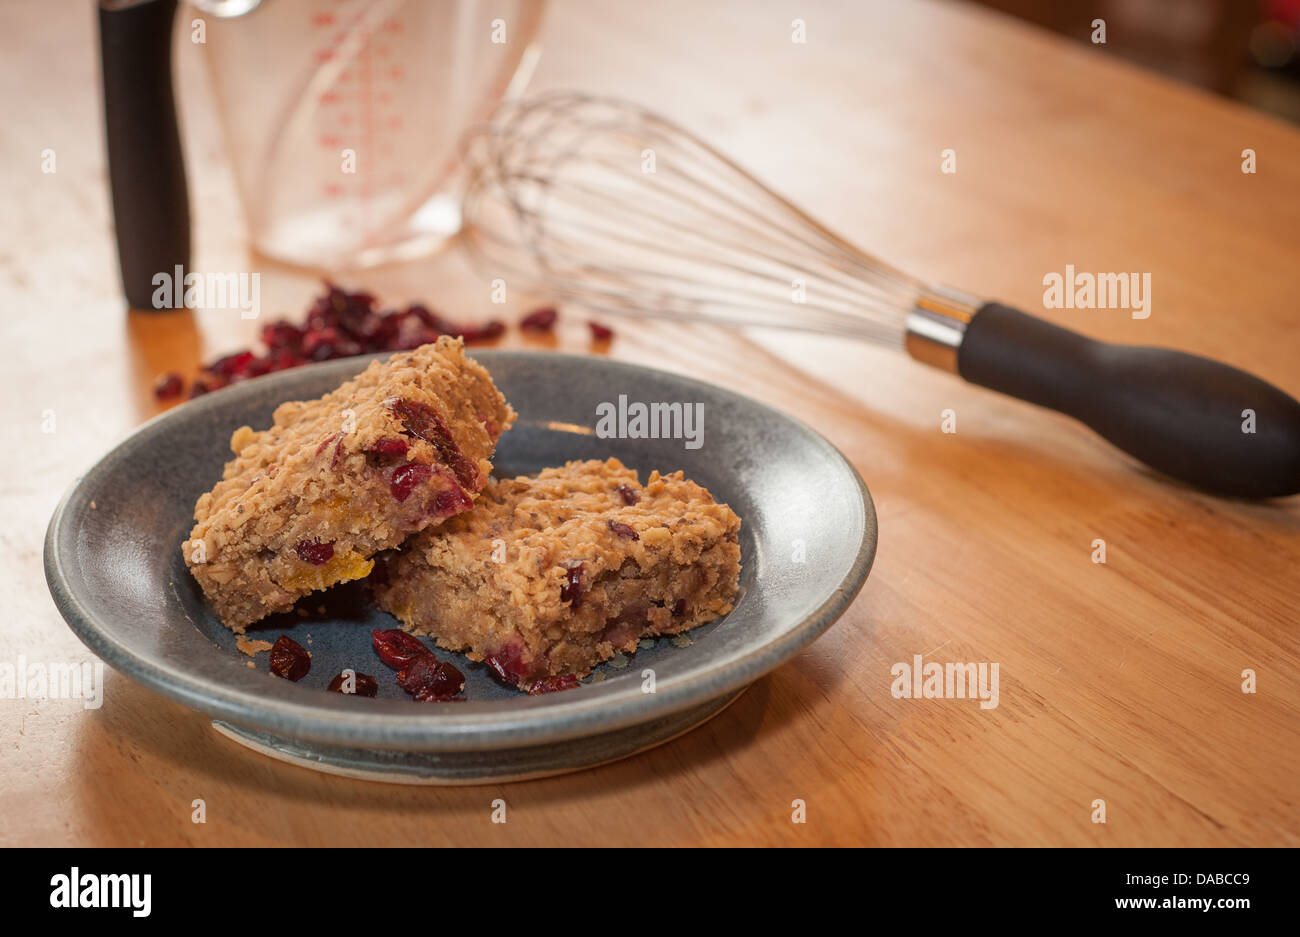 Color images of homemade oat and cranberry energy bars on a pottery plate showing some of the ingredients and utensils on table. Stock Photo